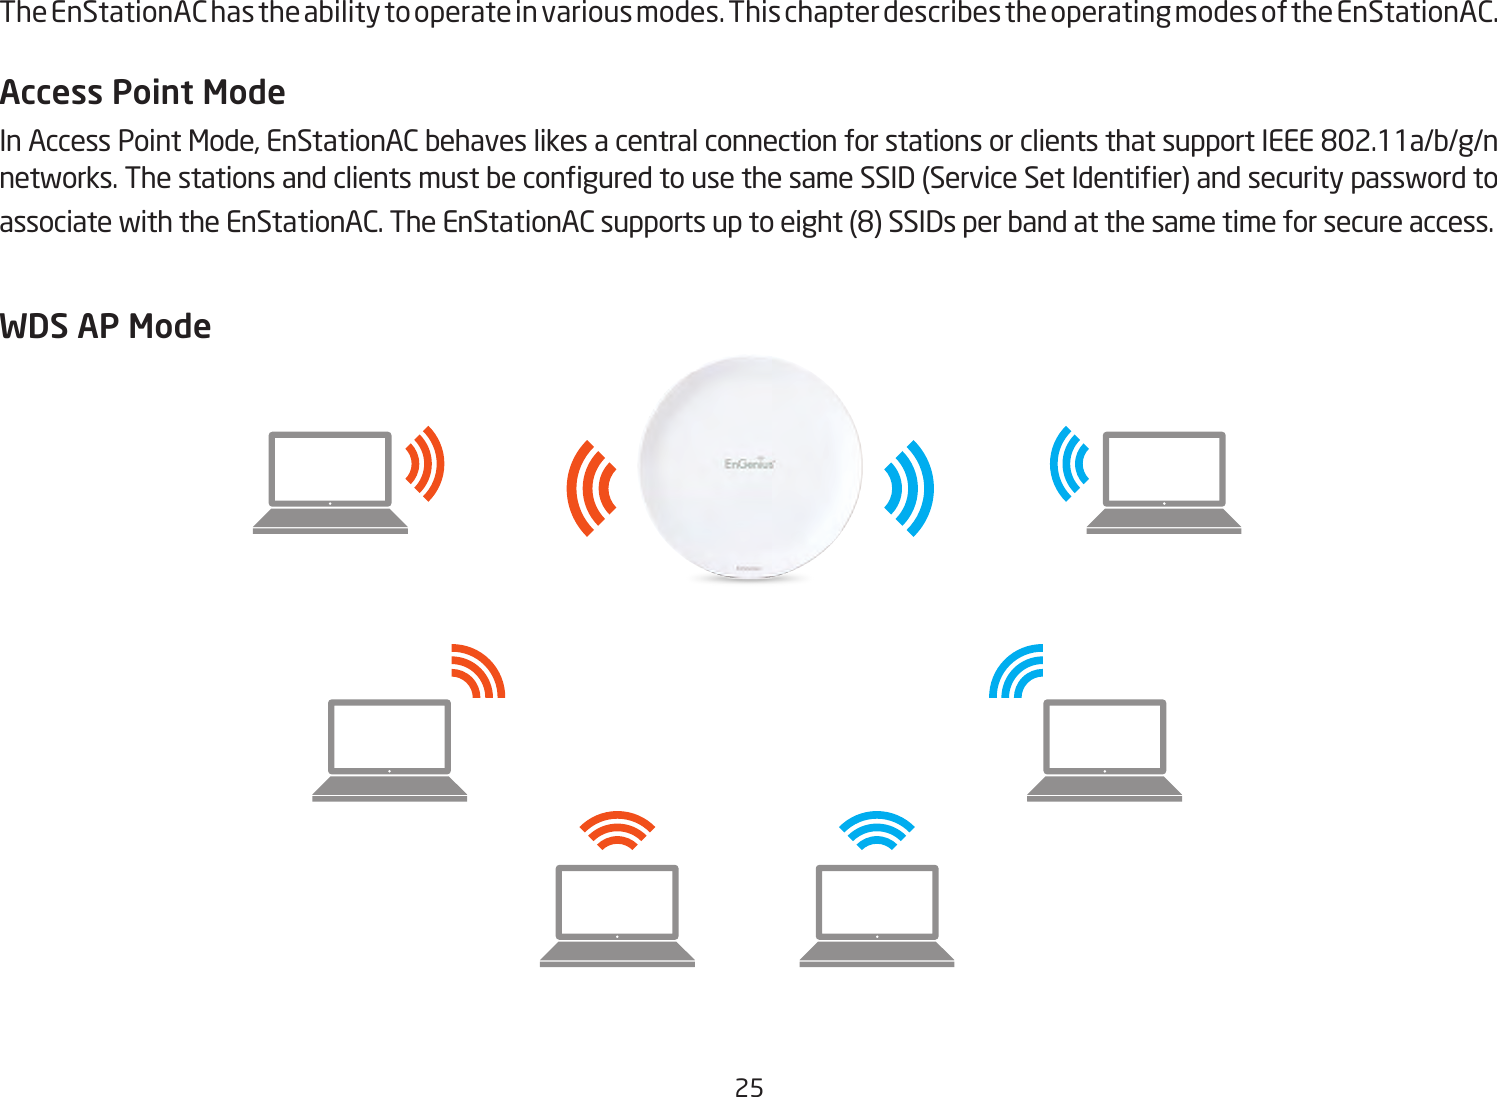 25 The EnStationAC has the ability to operate in various modes. This chapter describes the operating modes of the EnStationAC.Access Point ModeInAccessPointMode,EnStationACbehaveslikesacentralconnectionforstationsorclientsthatsupportIEEE802.11a/b/g/nnetworks.ThestationsandclientsmustbeconguredtousethesameSSID(ServiceSetIdentier)andsecuritypasswordtoassociatewiththeEnStationAC.TheEnStationACsupportsuptoeight(8)SSIDsperbandatthesametimeforsecureaccess.  WDS AP Mode